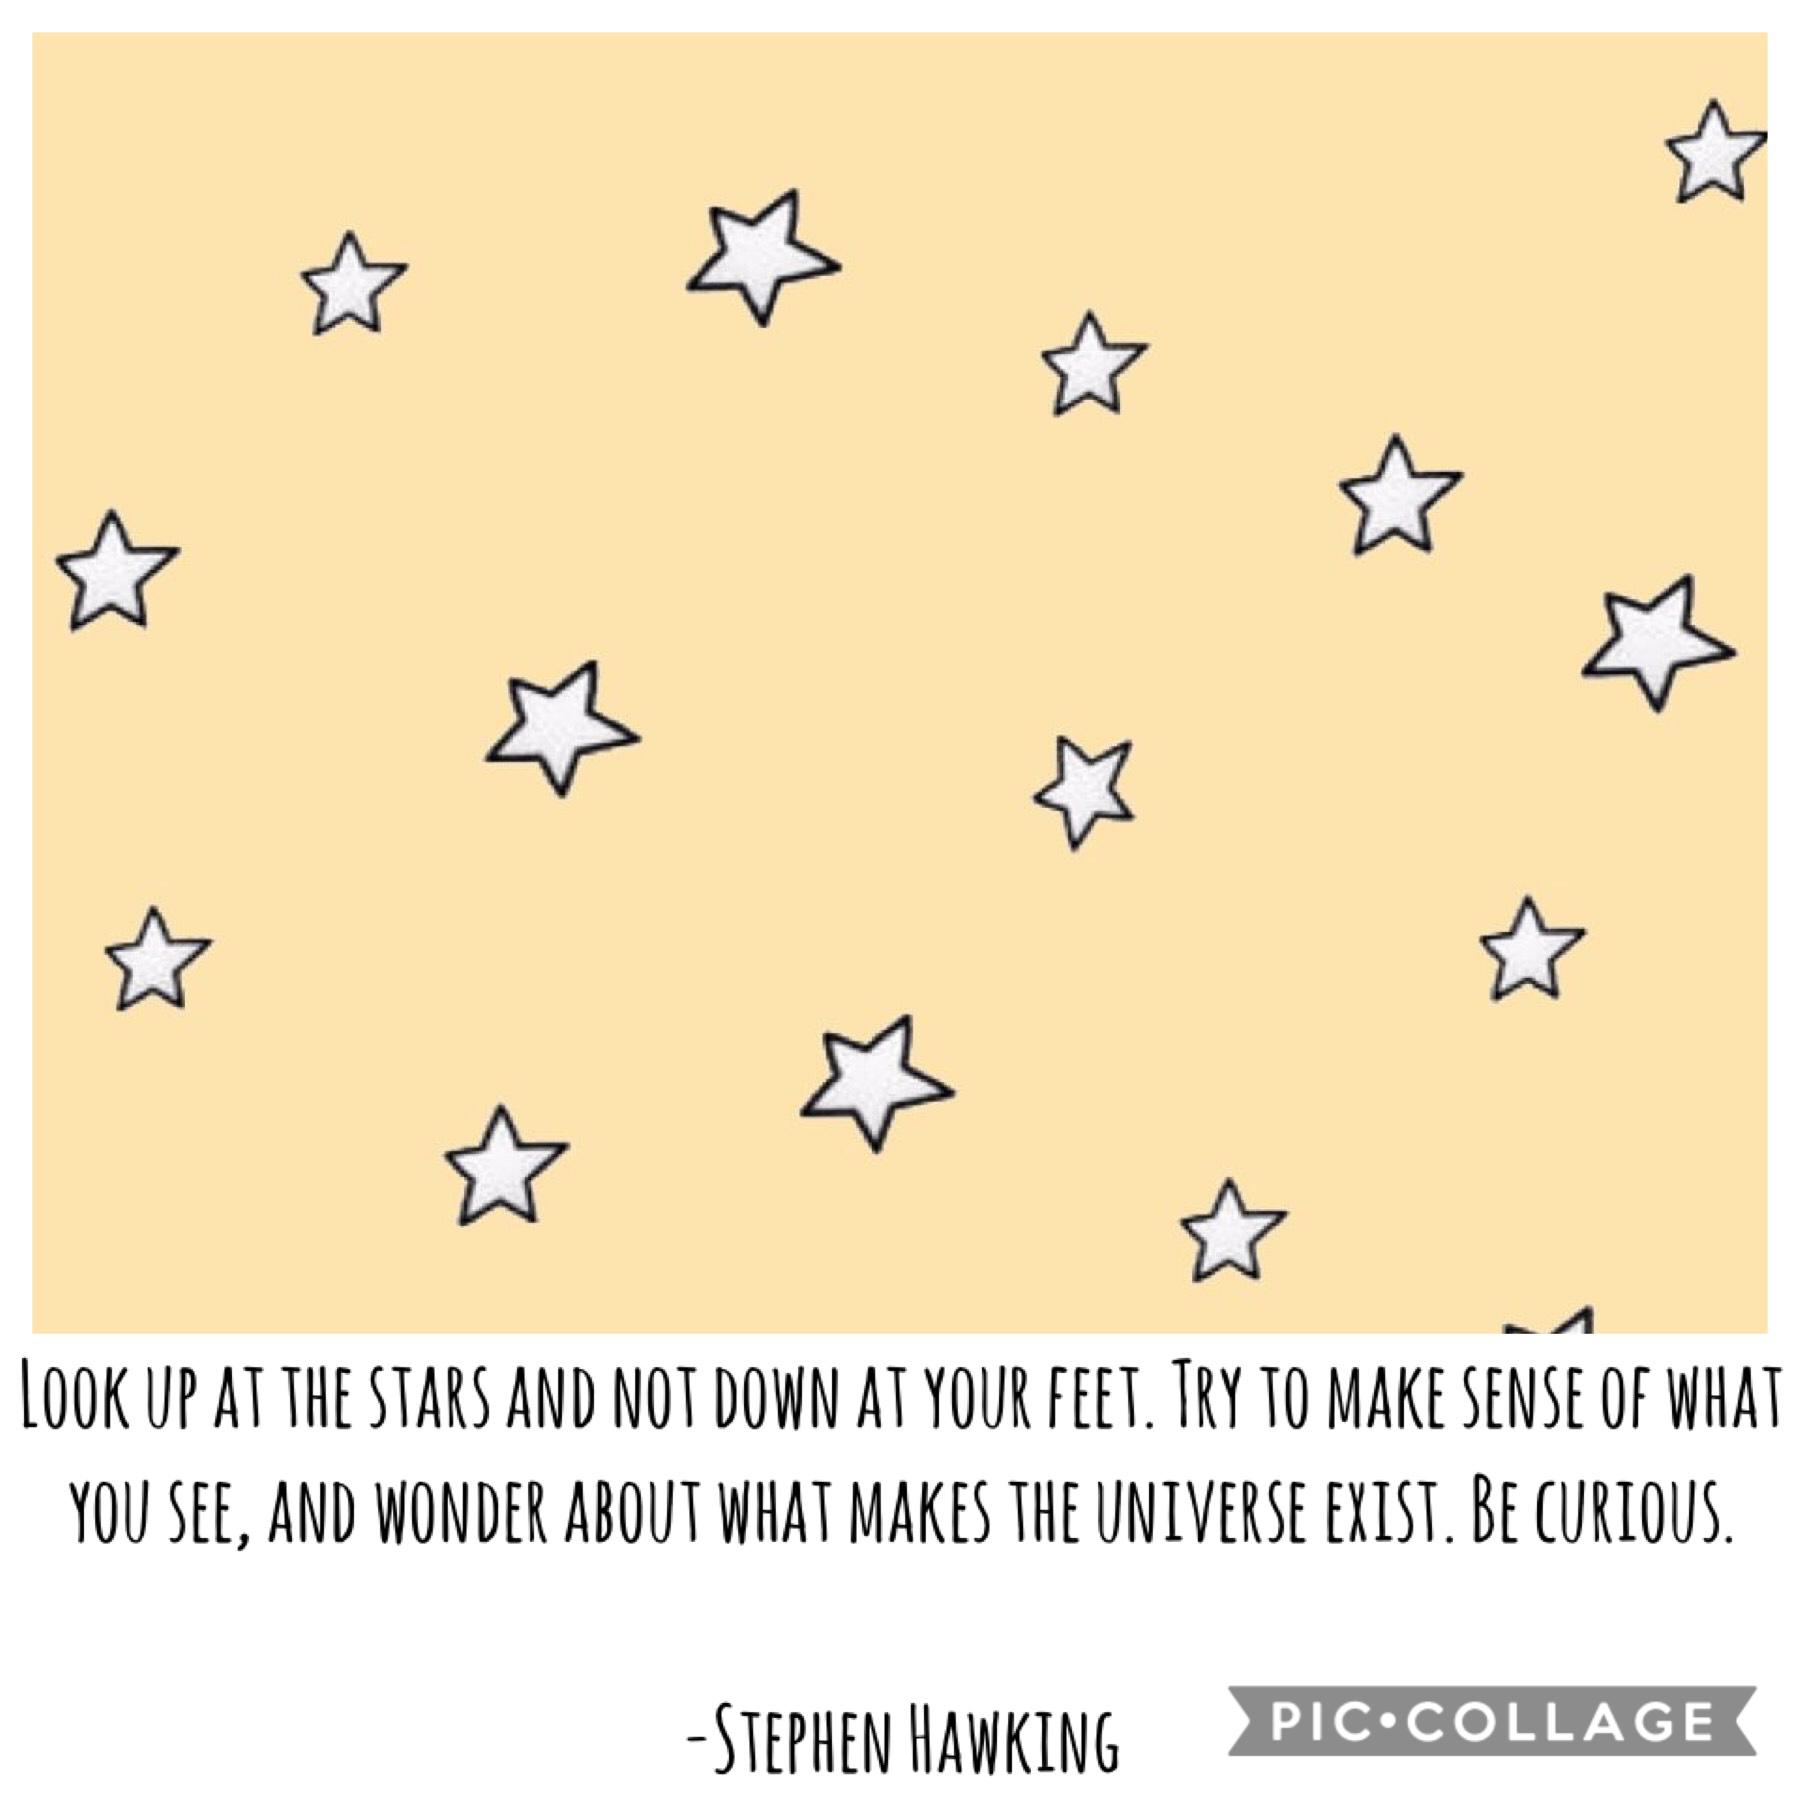 "Look up at the stars and not down at your feet. Try to make sense of what you see, and wonder about what makes the universe exist. Be curious."          -Stephen Hawking
